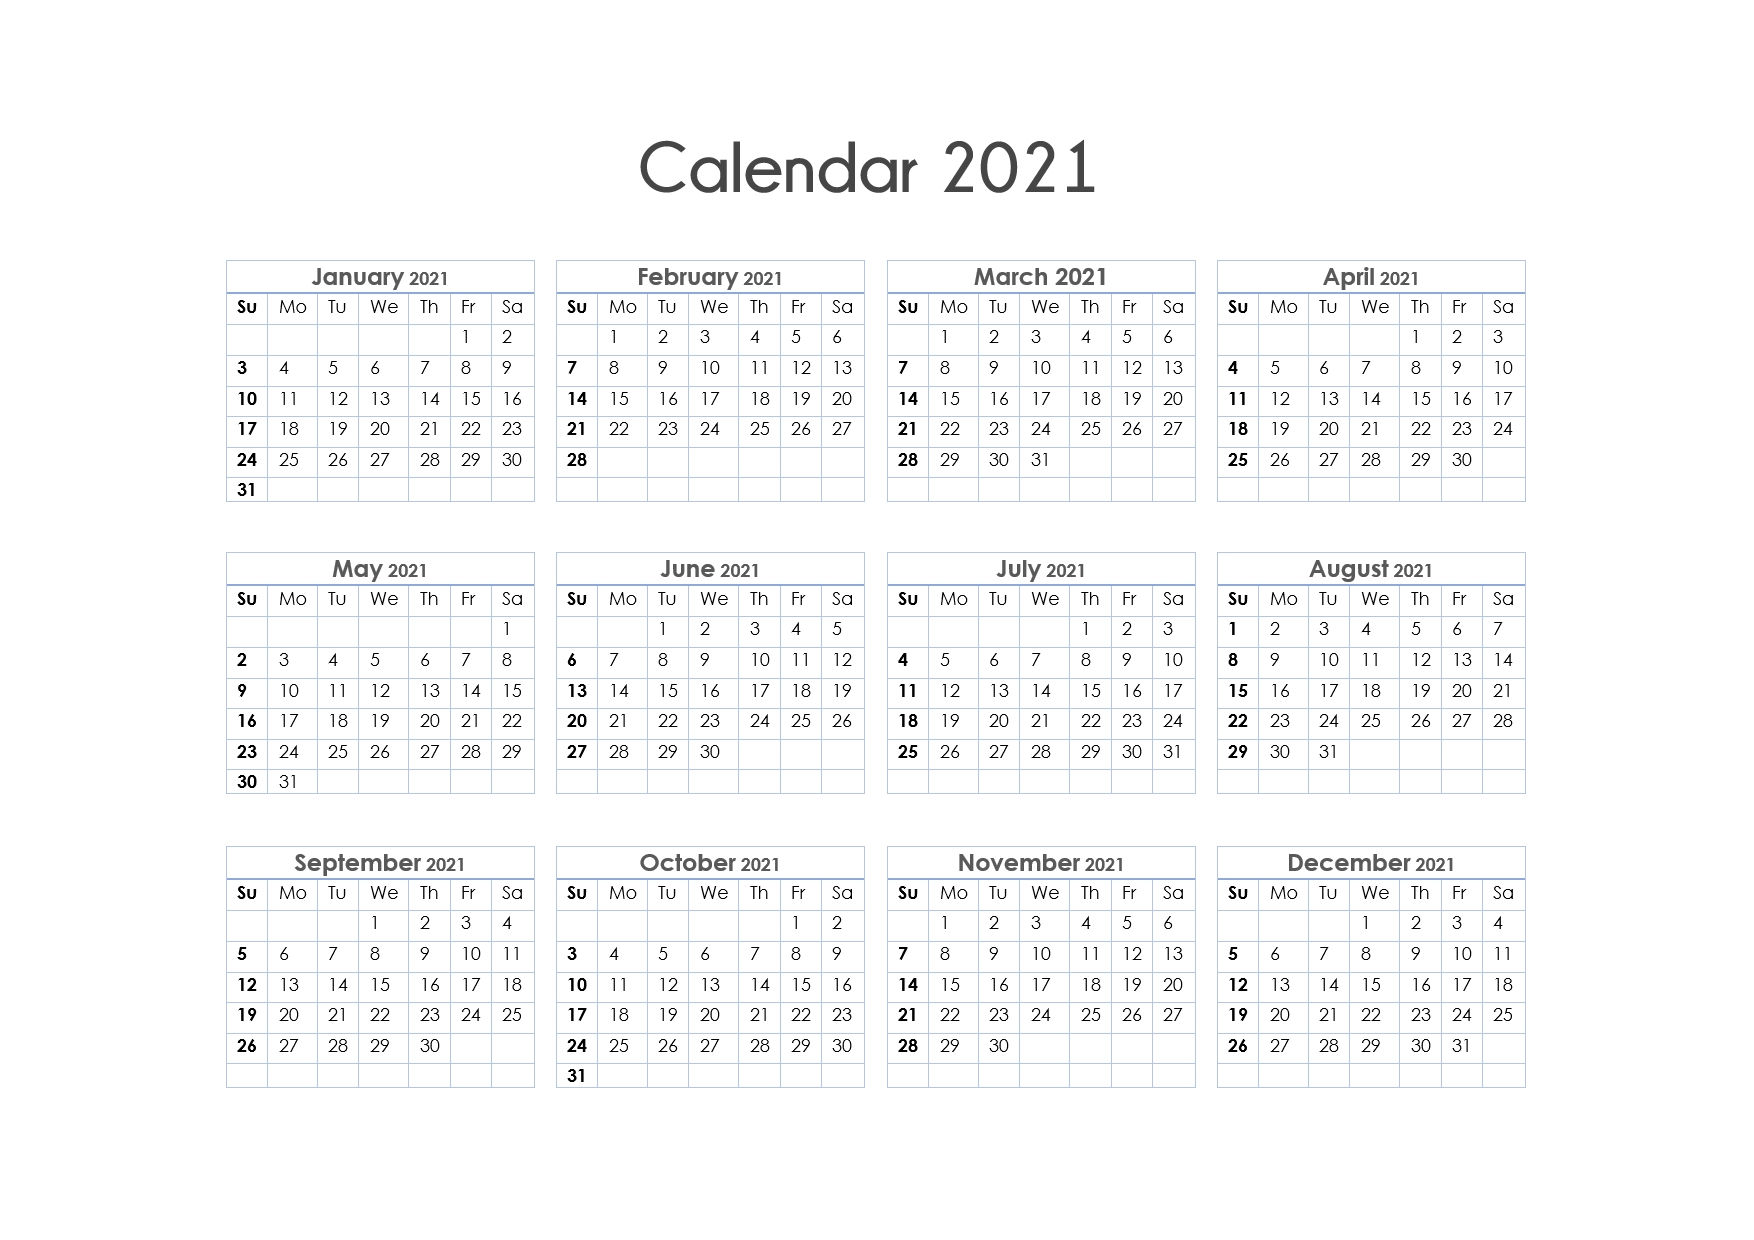 56+ Printable Calendar 2021 One Page, Us 2021 Calendar-Print Free 2021 Calendars Without Downloading